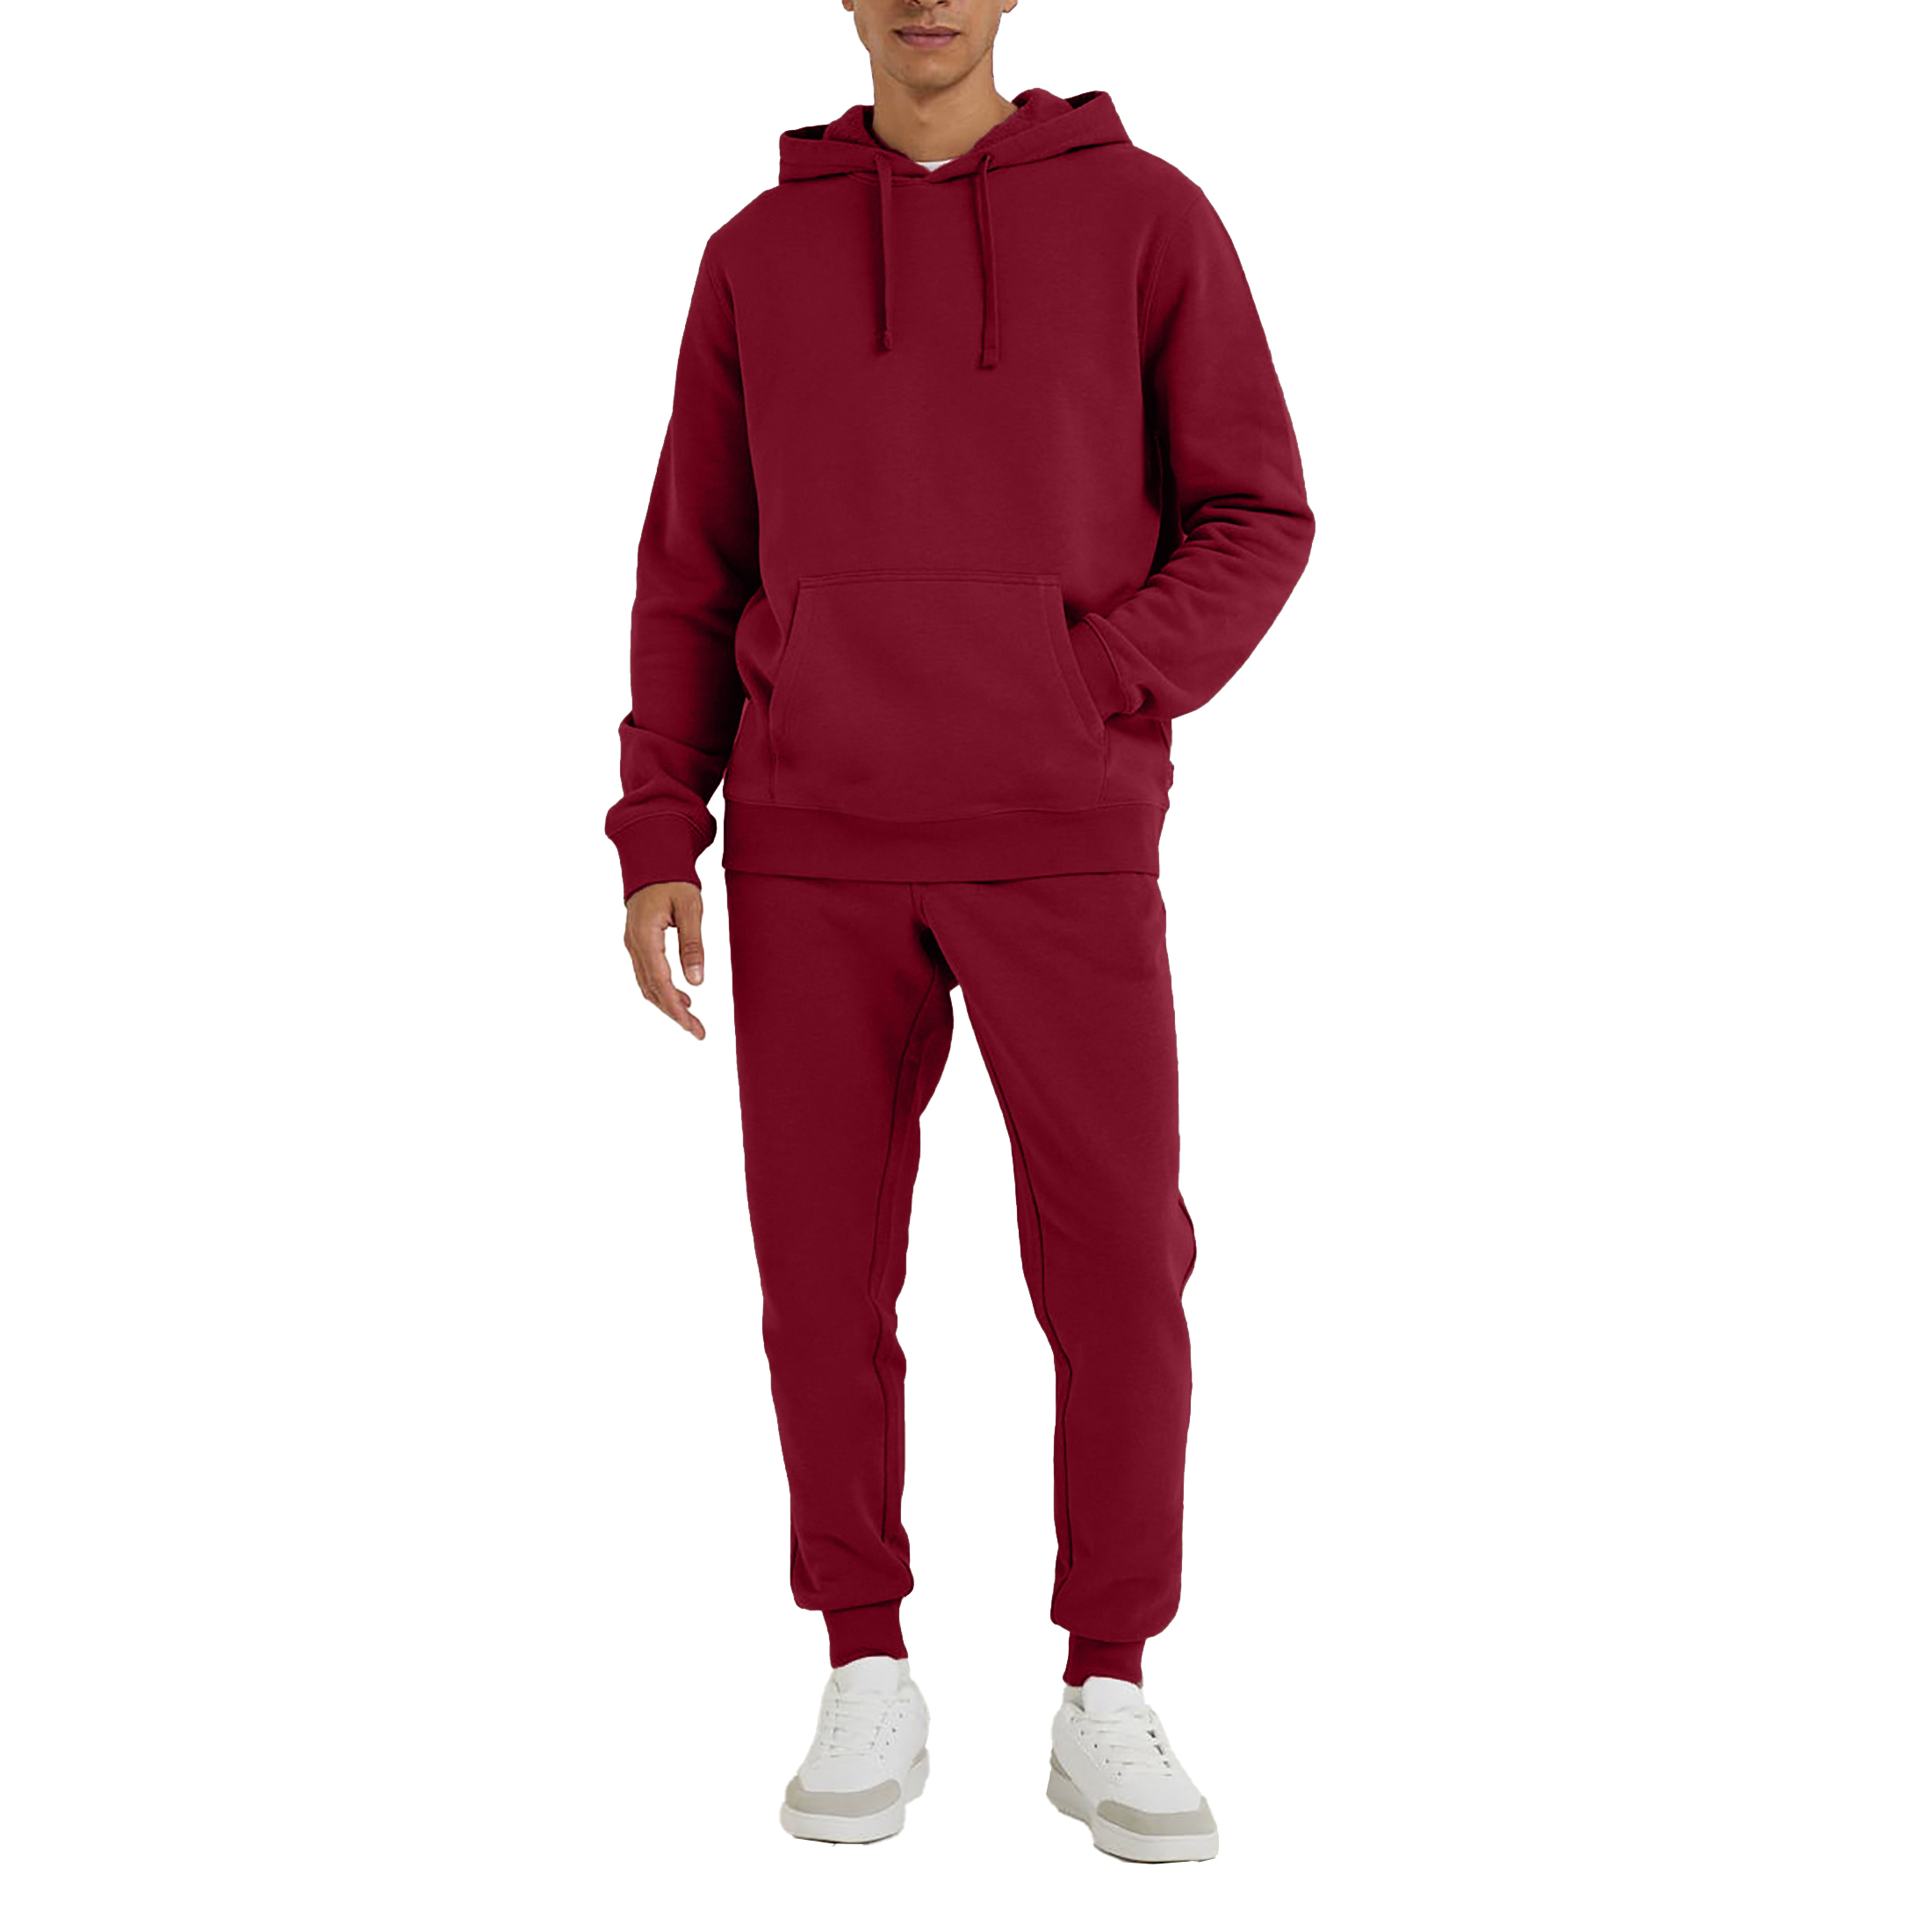 Men's Athletic Warm Jogging Pullover Active Tracksuit - Red, X-Large